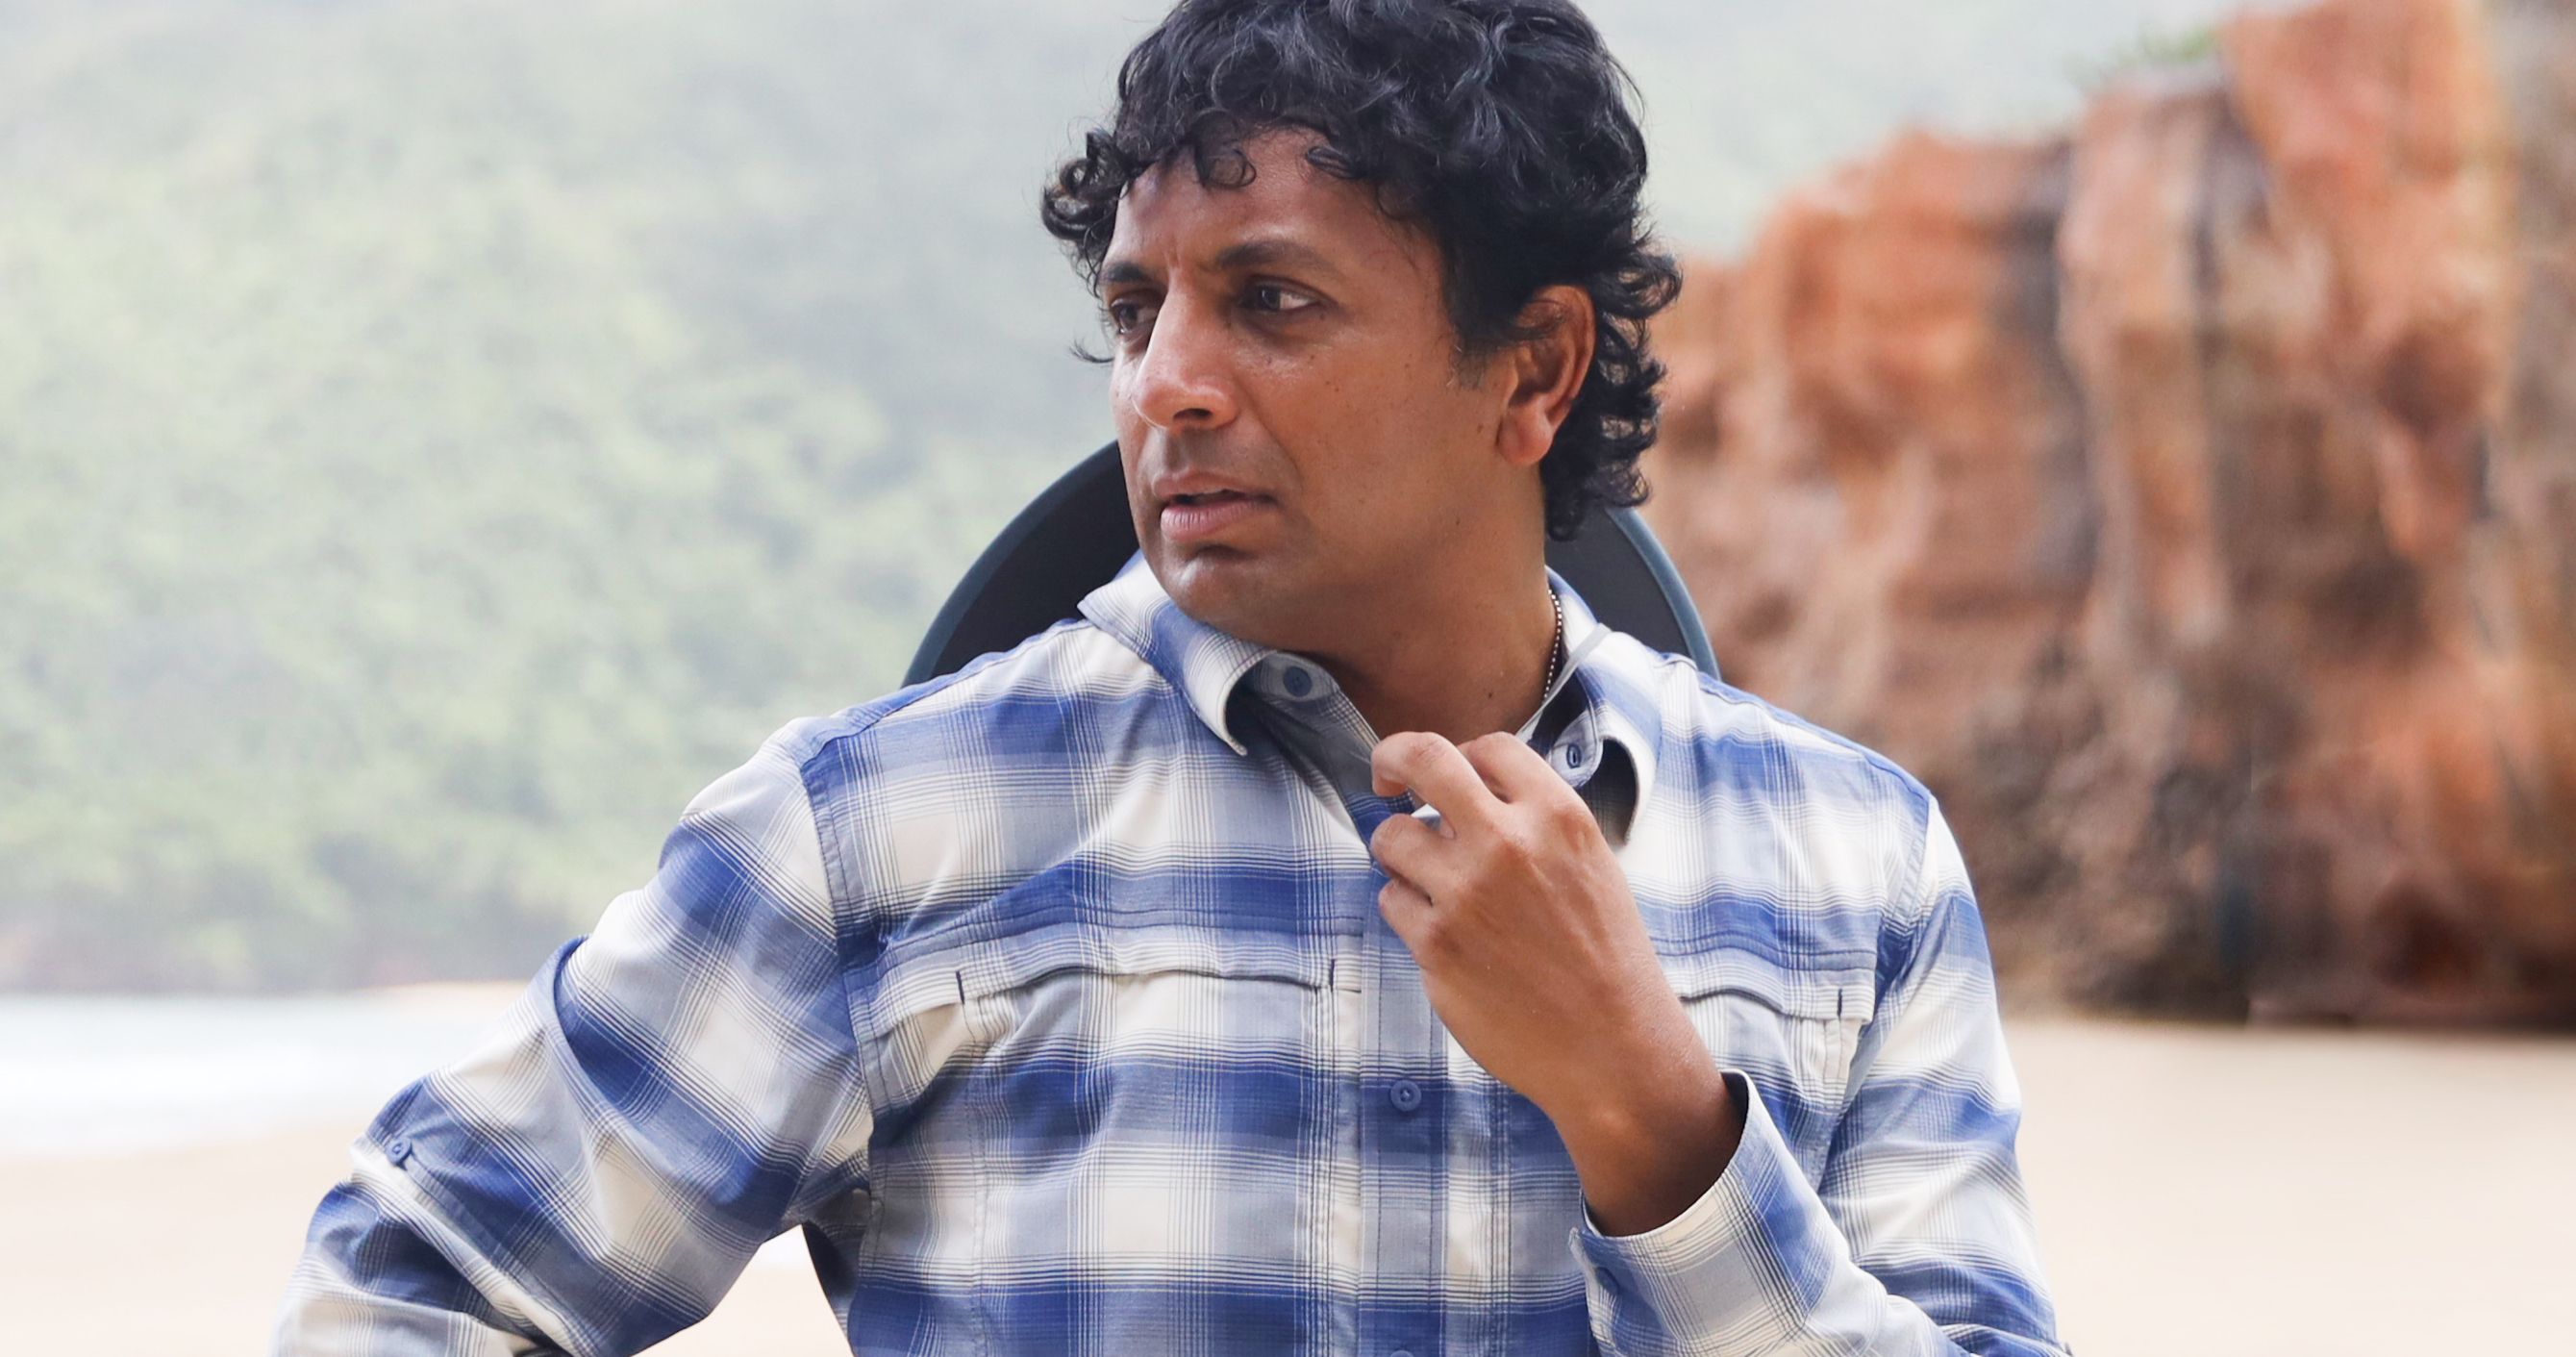 M. Night Shyamalan Teases His Next Movie with a 'Super Tight' Script